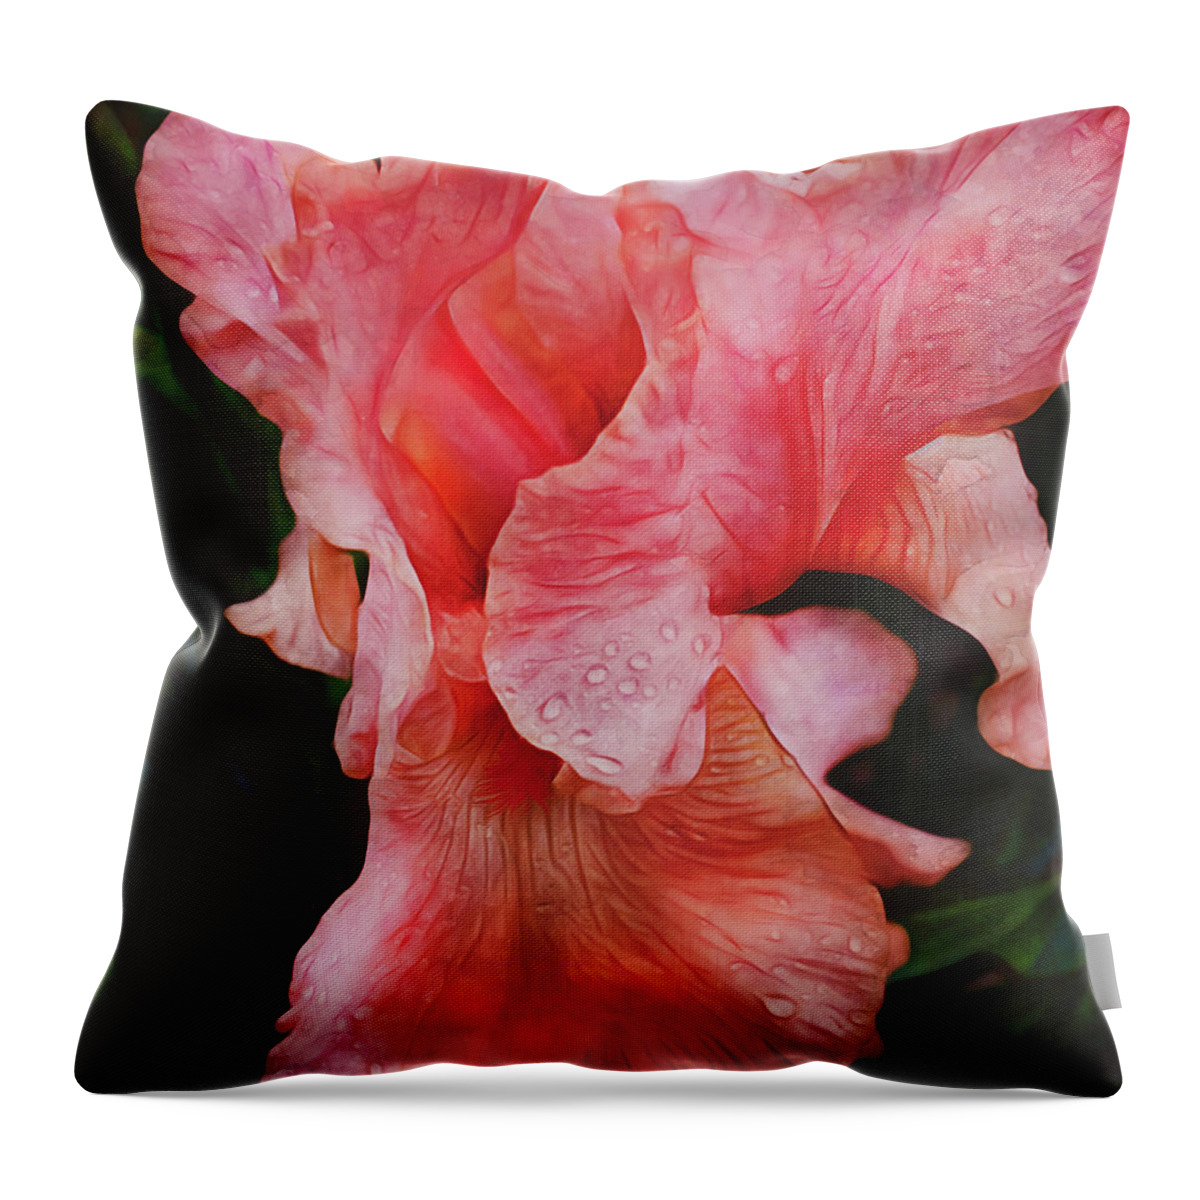 Pink Iris Throw Pillow featuring the photograph Pink Iris Glory by Anna Louise